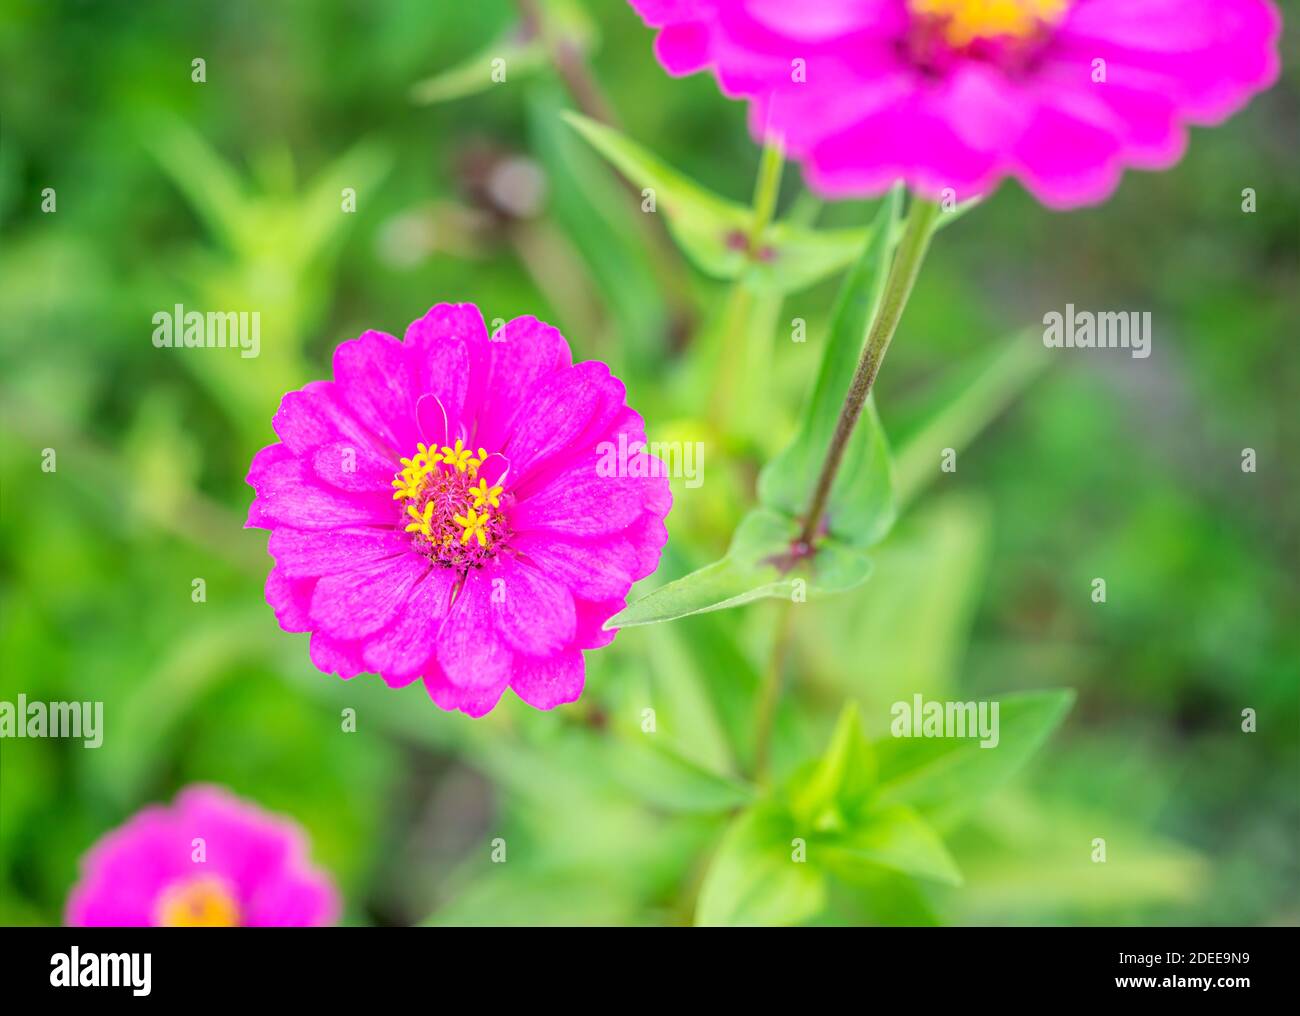 Gerbera or daisy, Flower purple color on blurred green nature background, Selective focus, Macro Stock Photo